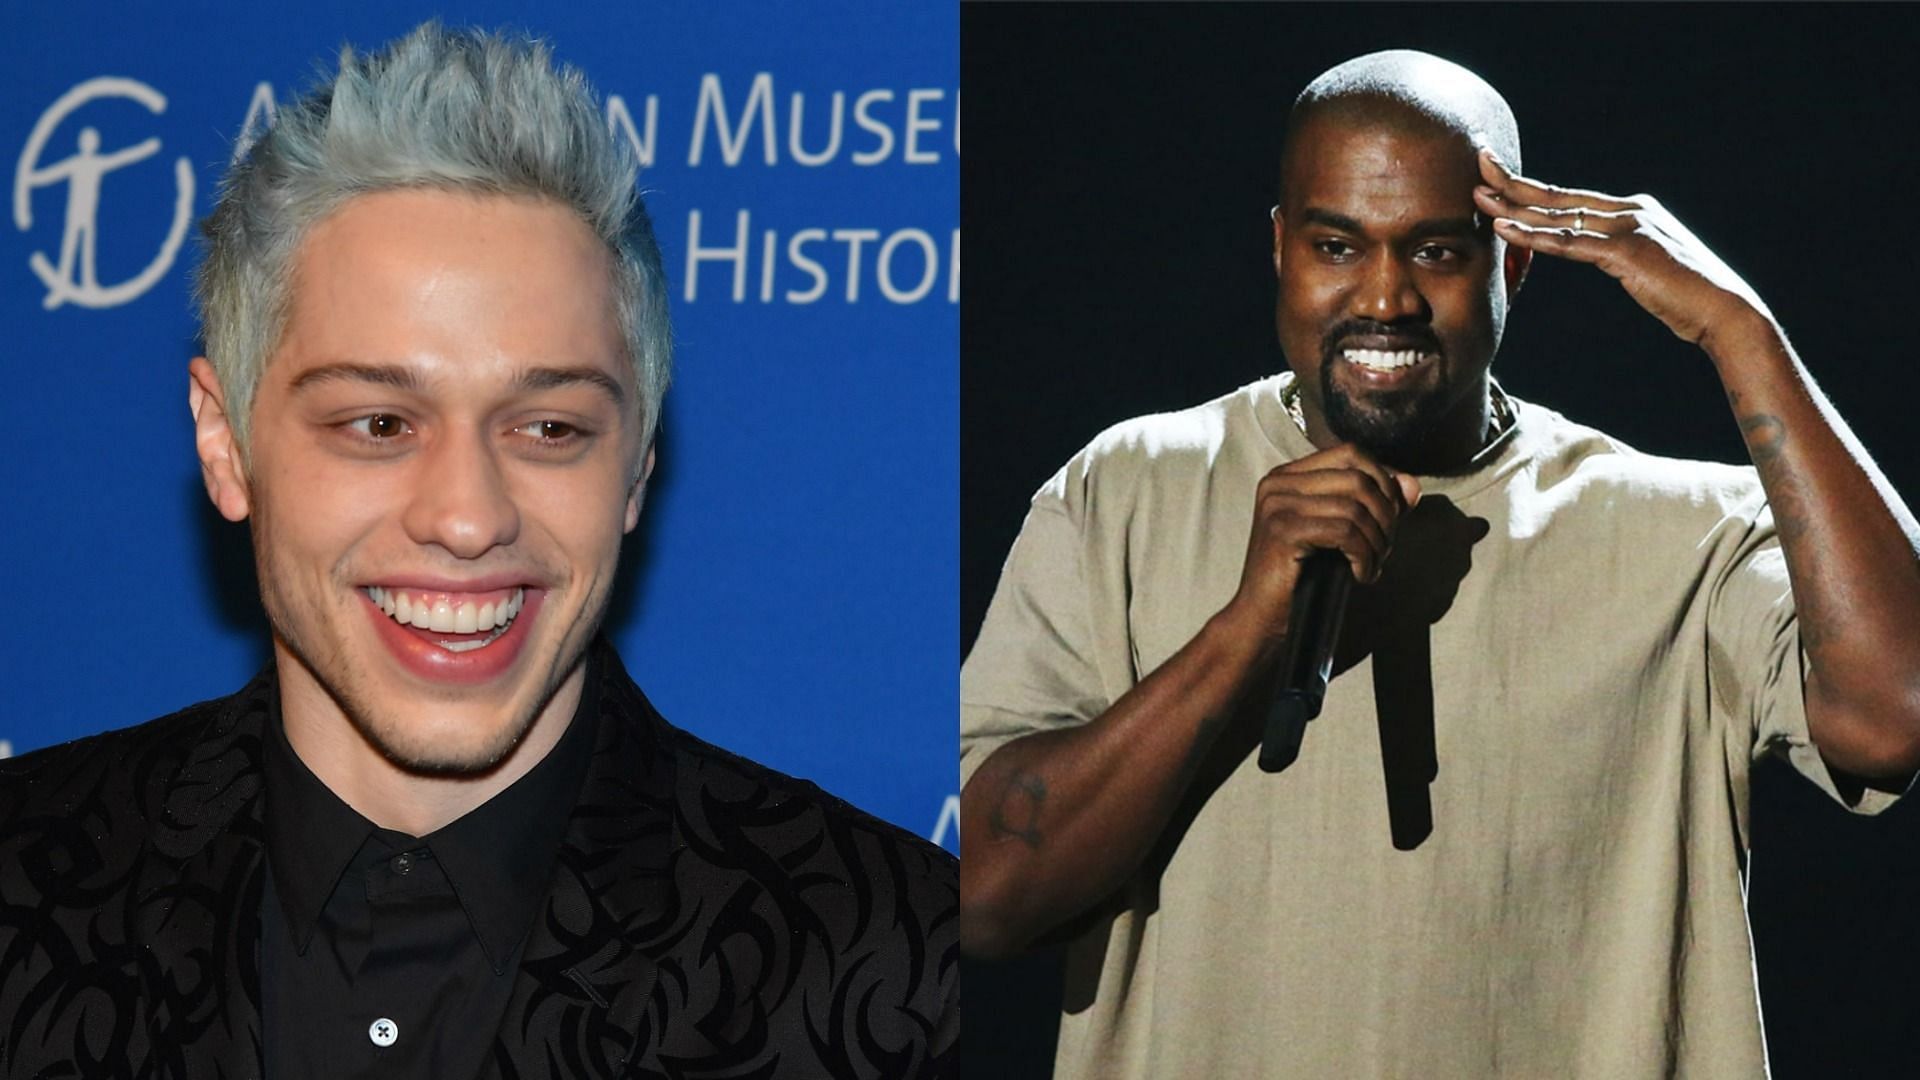 Pete Davidson has been off social media because of his mental health (Image via Getty Images/Angela Weiss/Michael Tran)